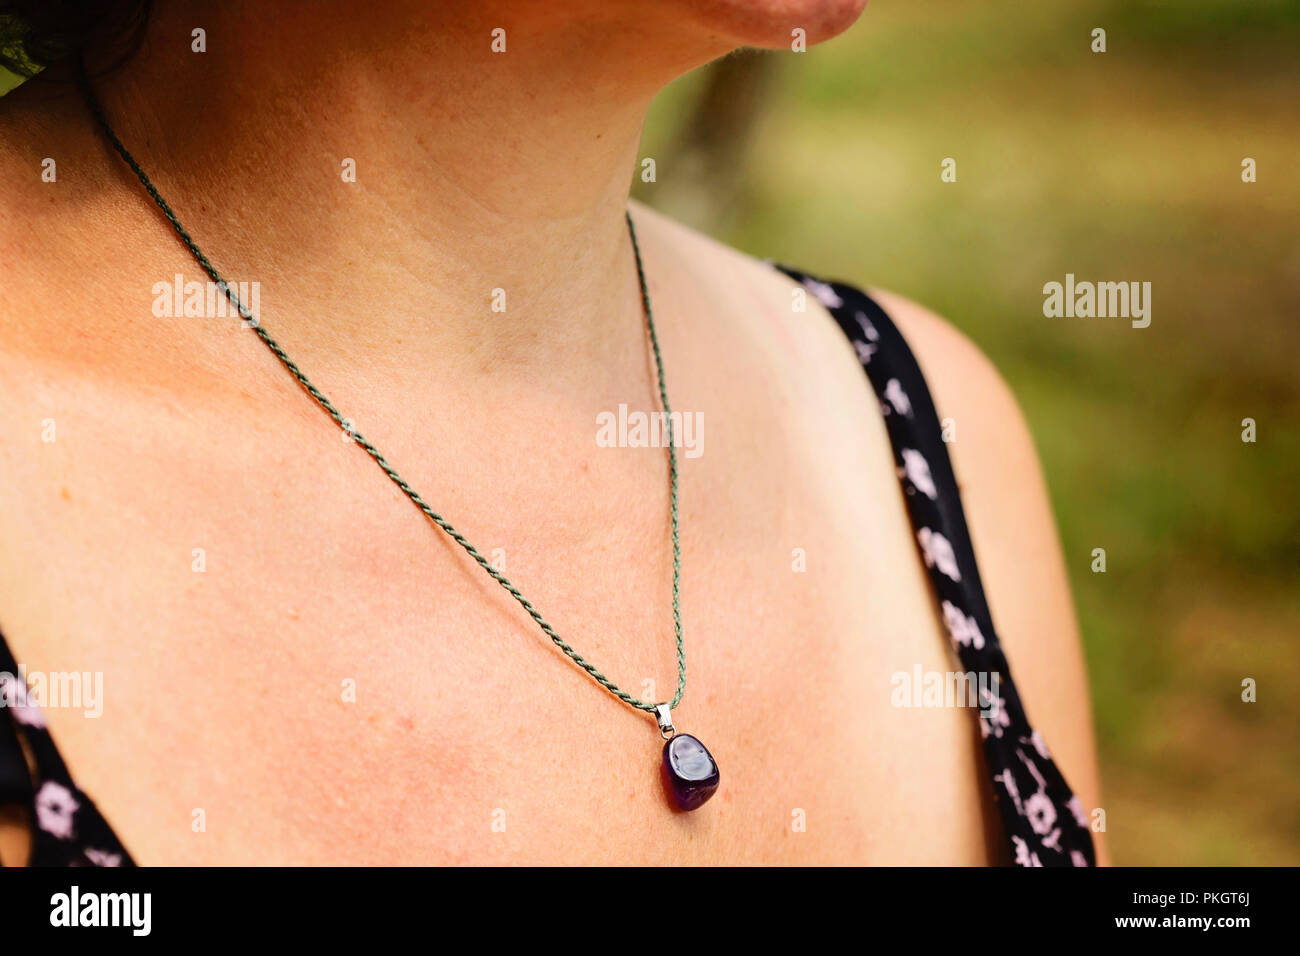 Woman wearing a Amethyst pendant necklace Stock Photo